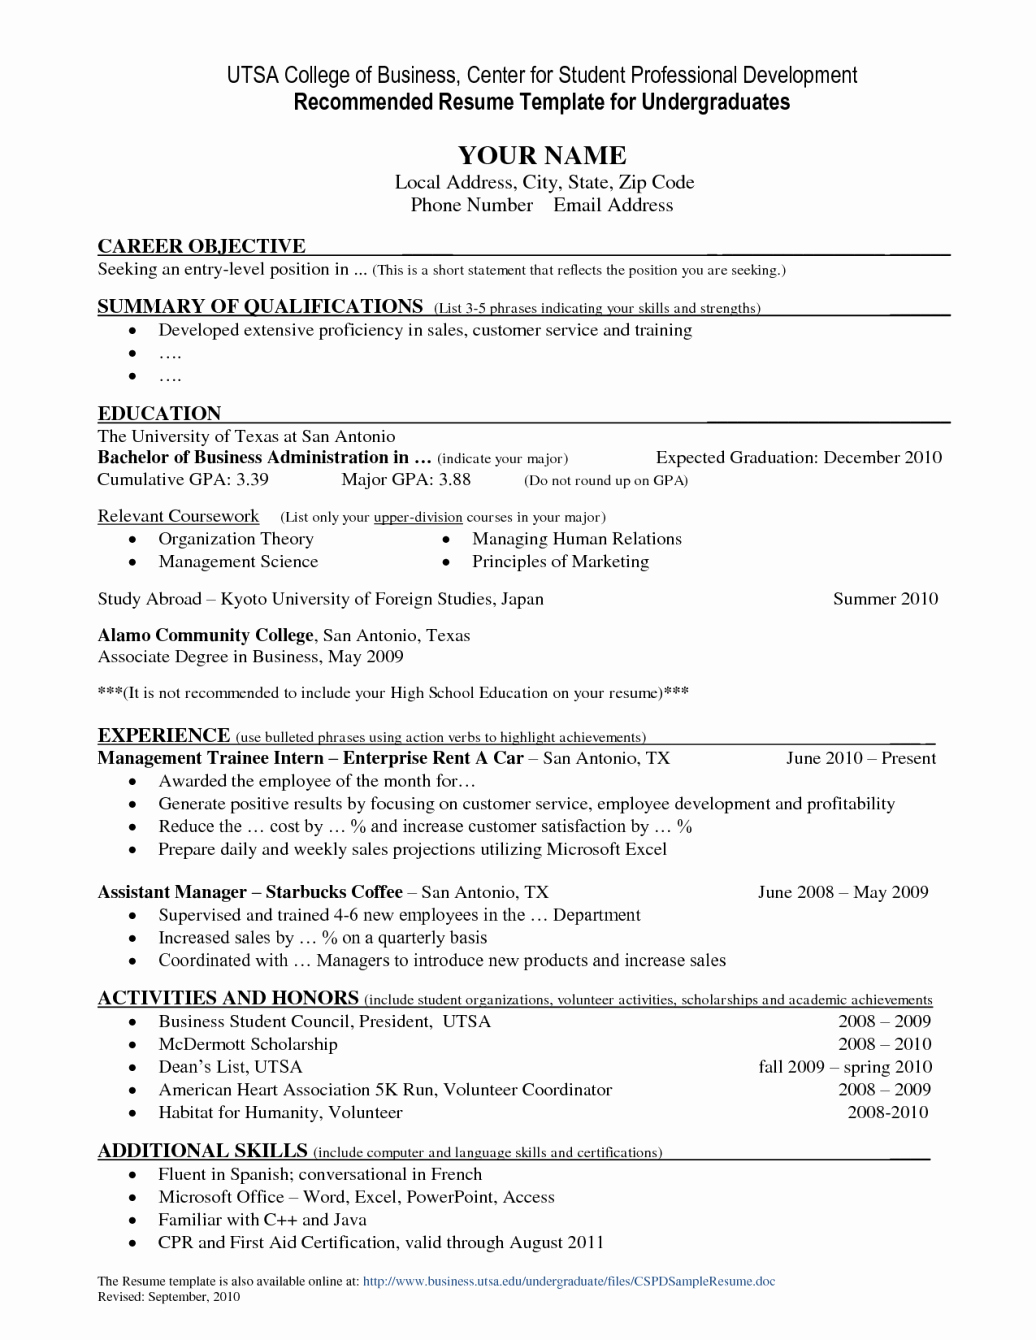 Sample Resume for College Graduate New Business Student Resume